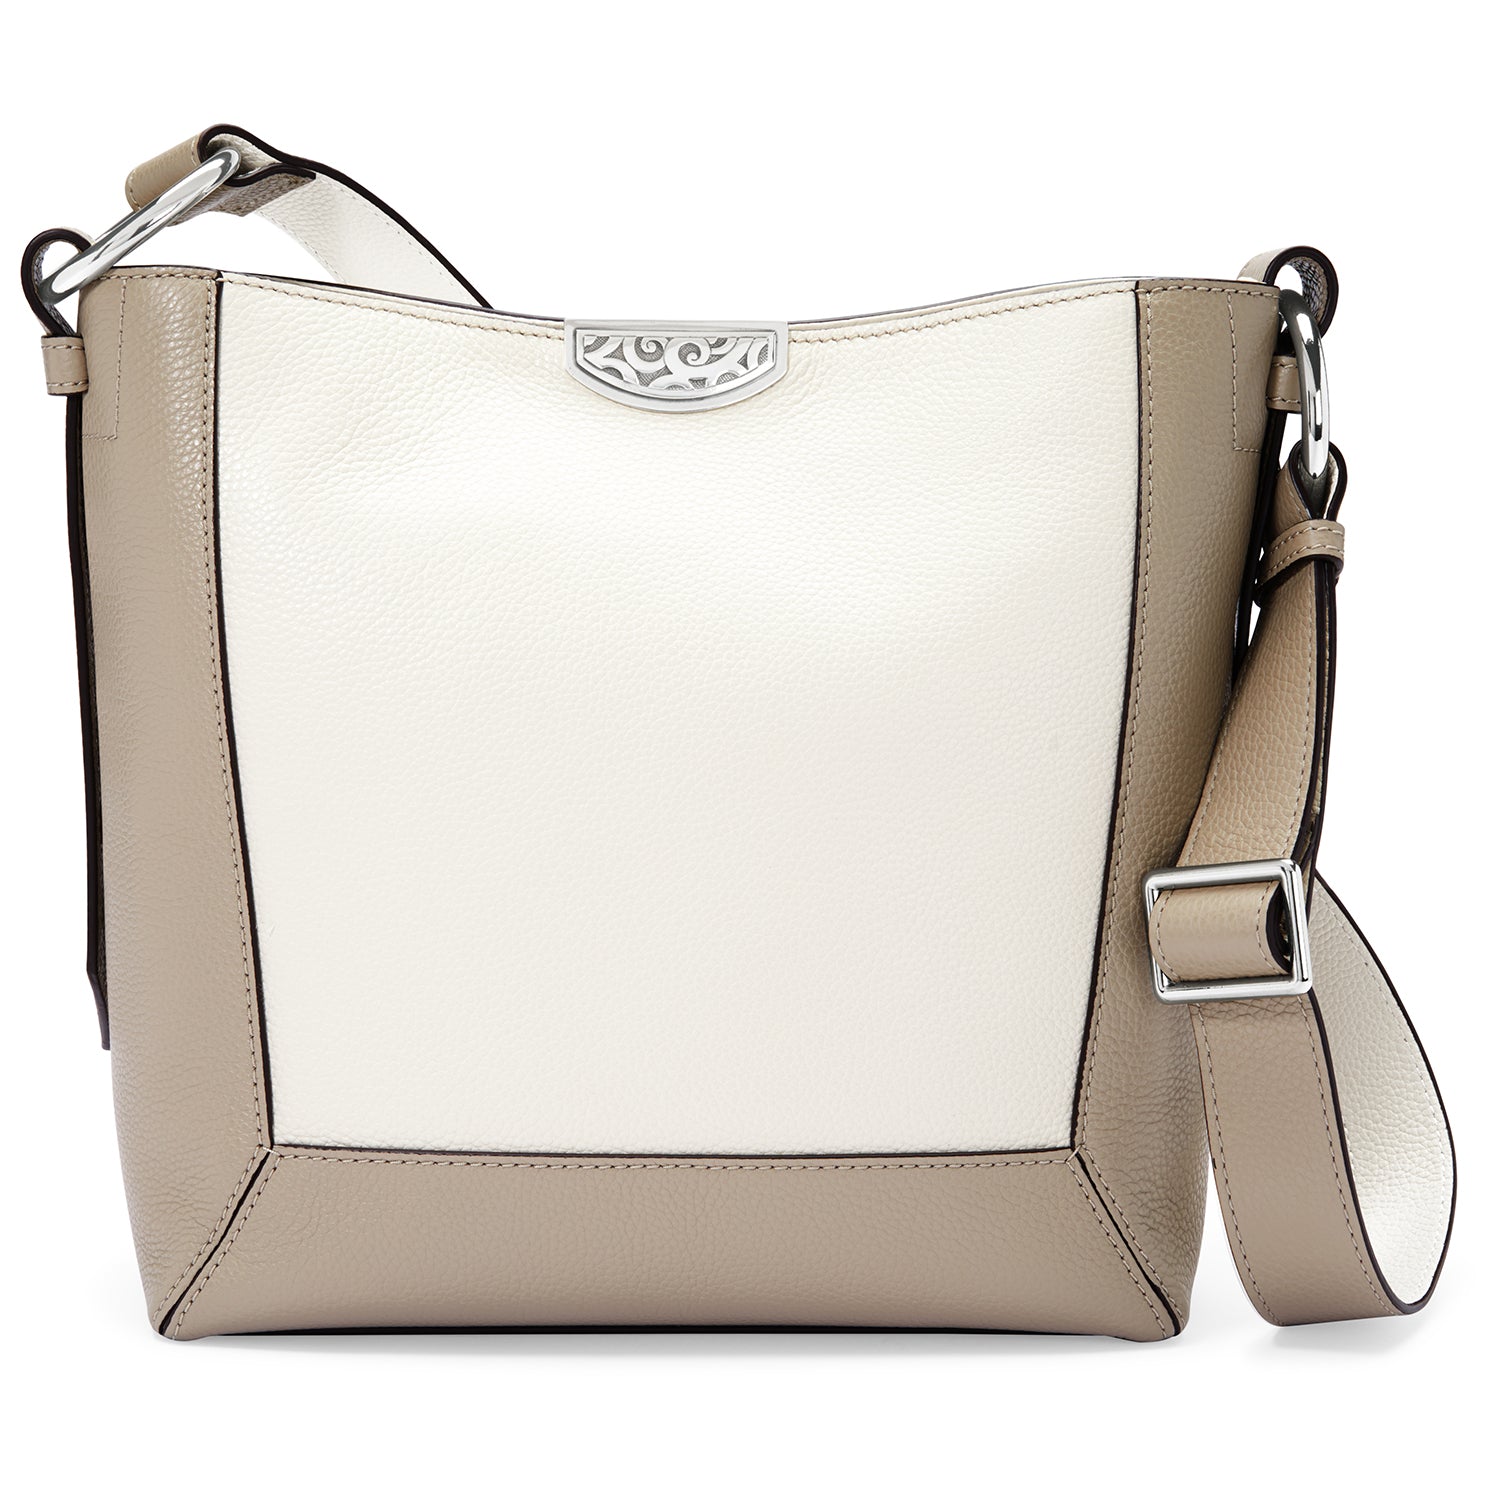 Kylie Cross Body Bag Front View